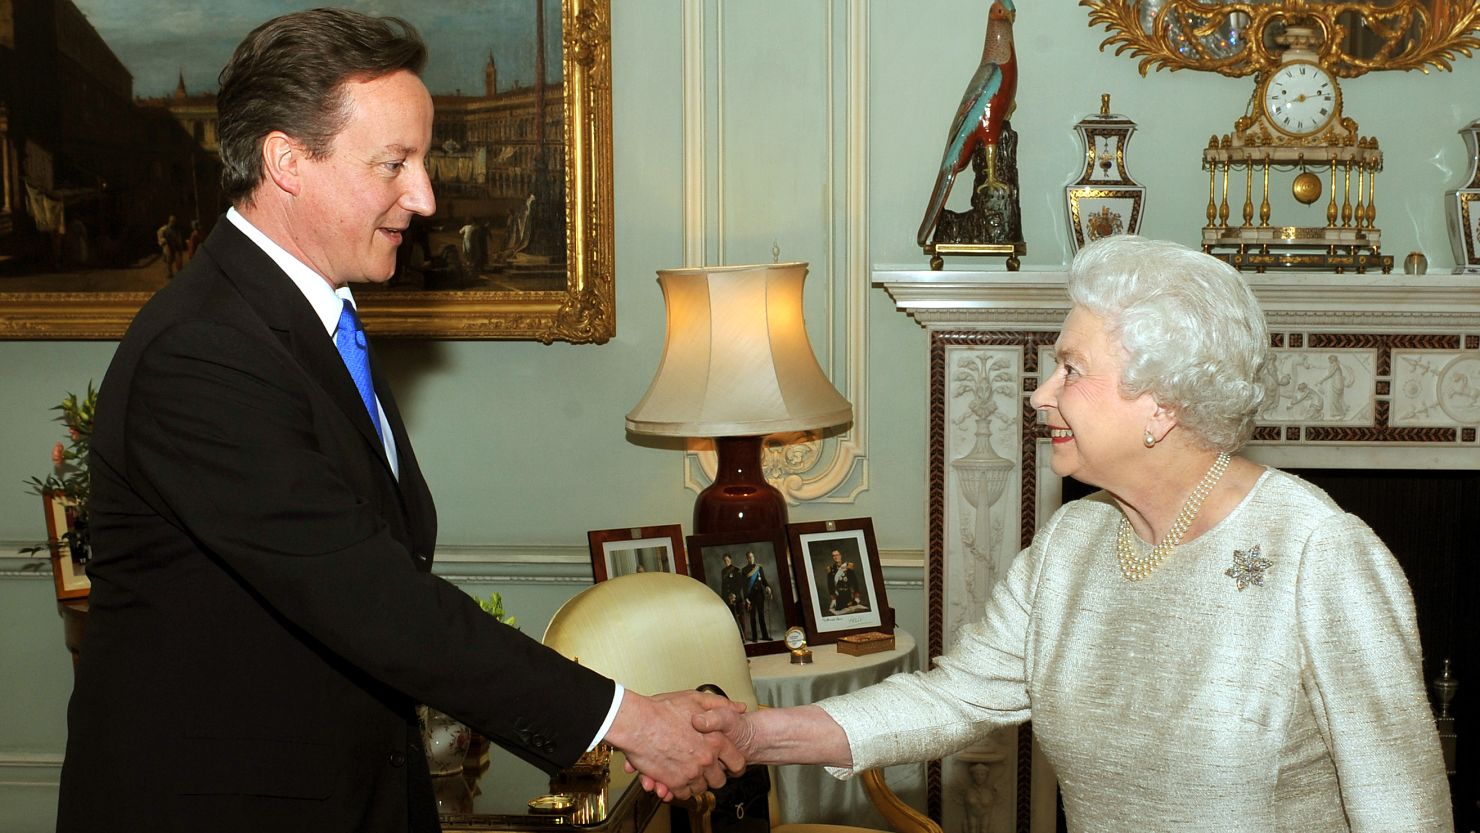 Former British Prime Minister David Cameron pictured with Queen Elizabeth II in 2010.